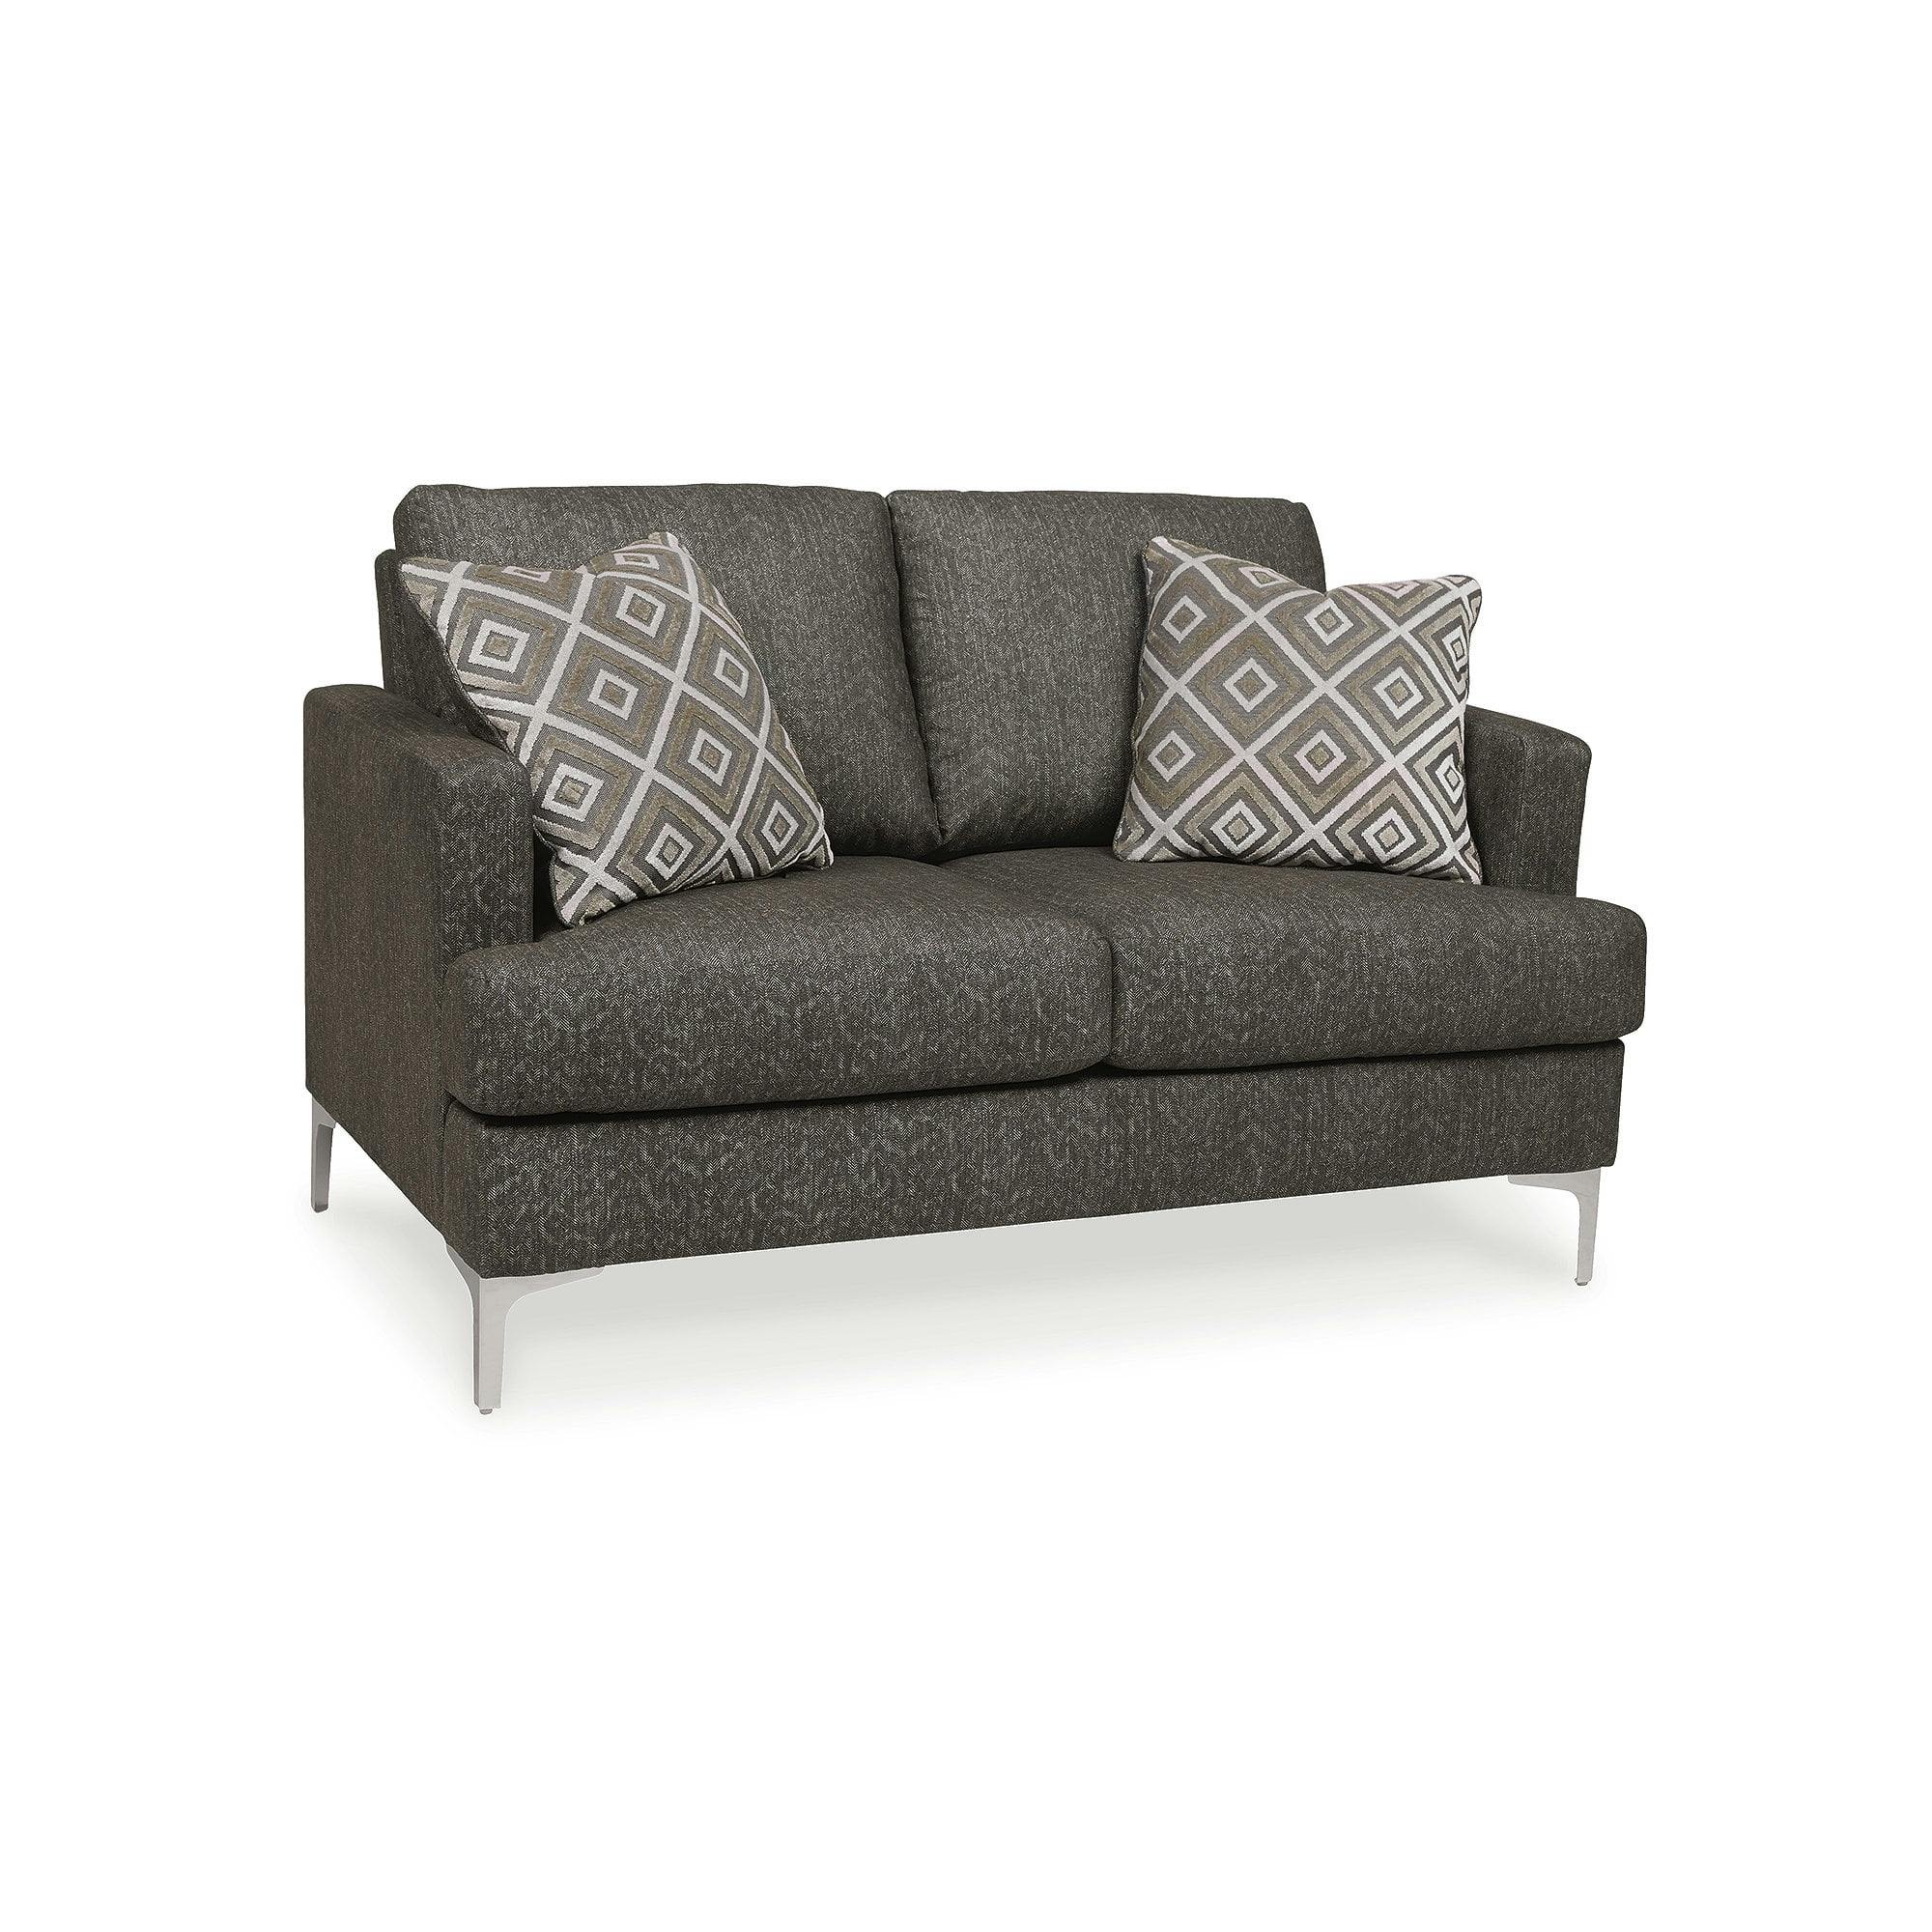 Transitional Java Herringbone Fabric Loveseat with Removable Cushions